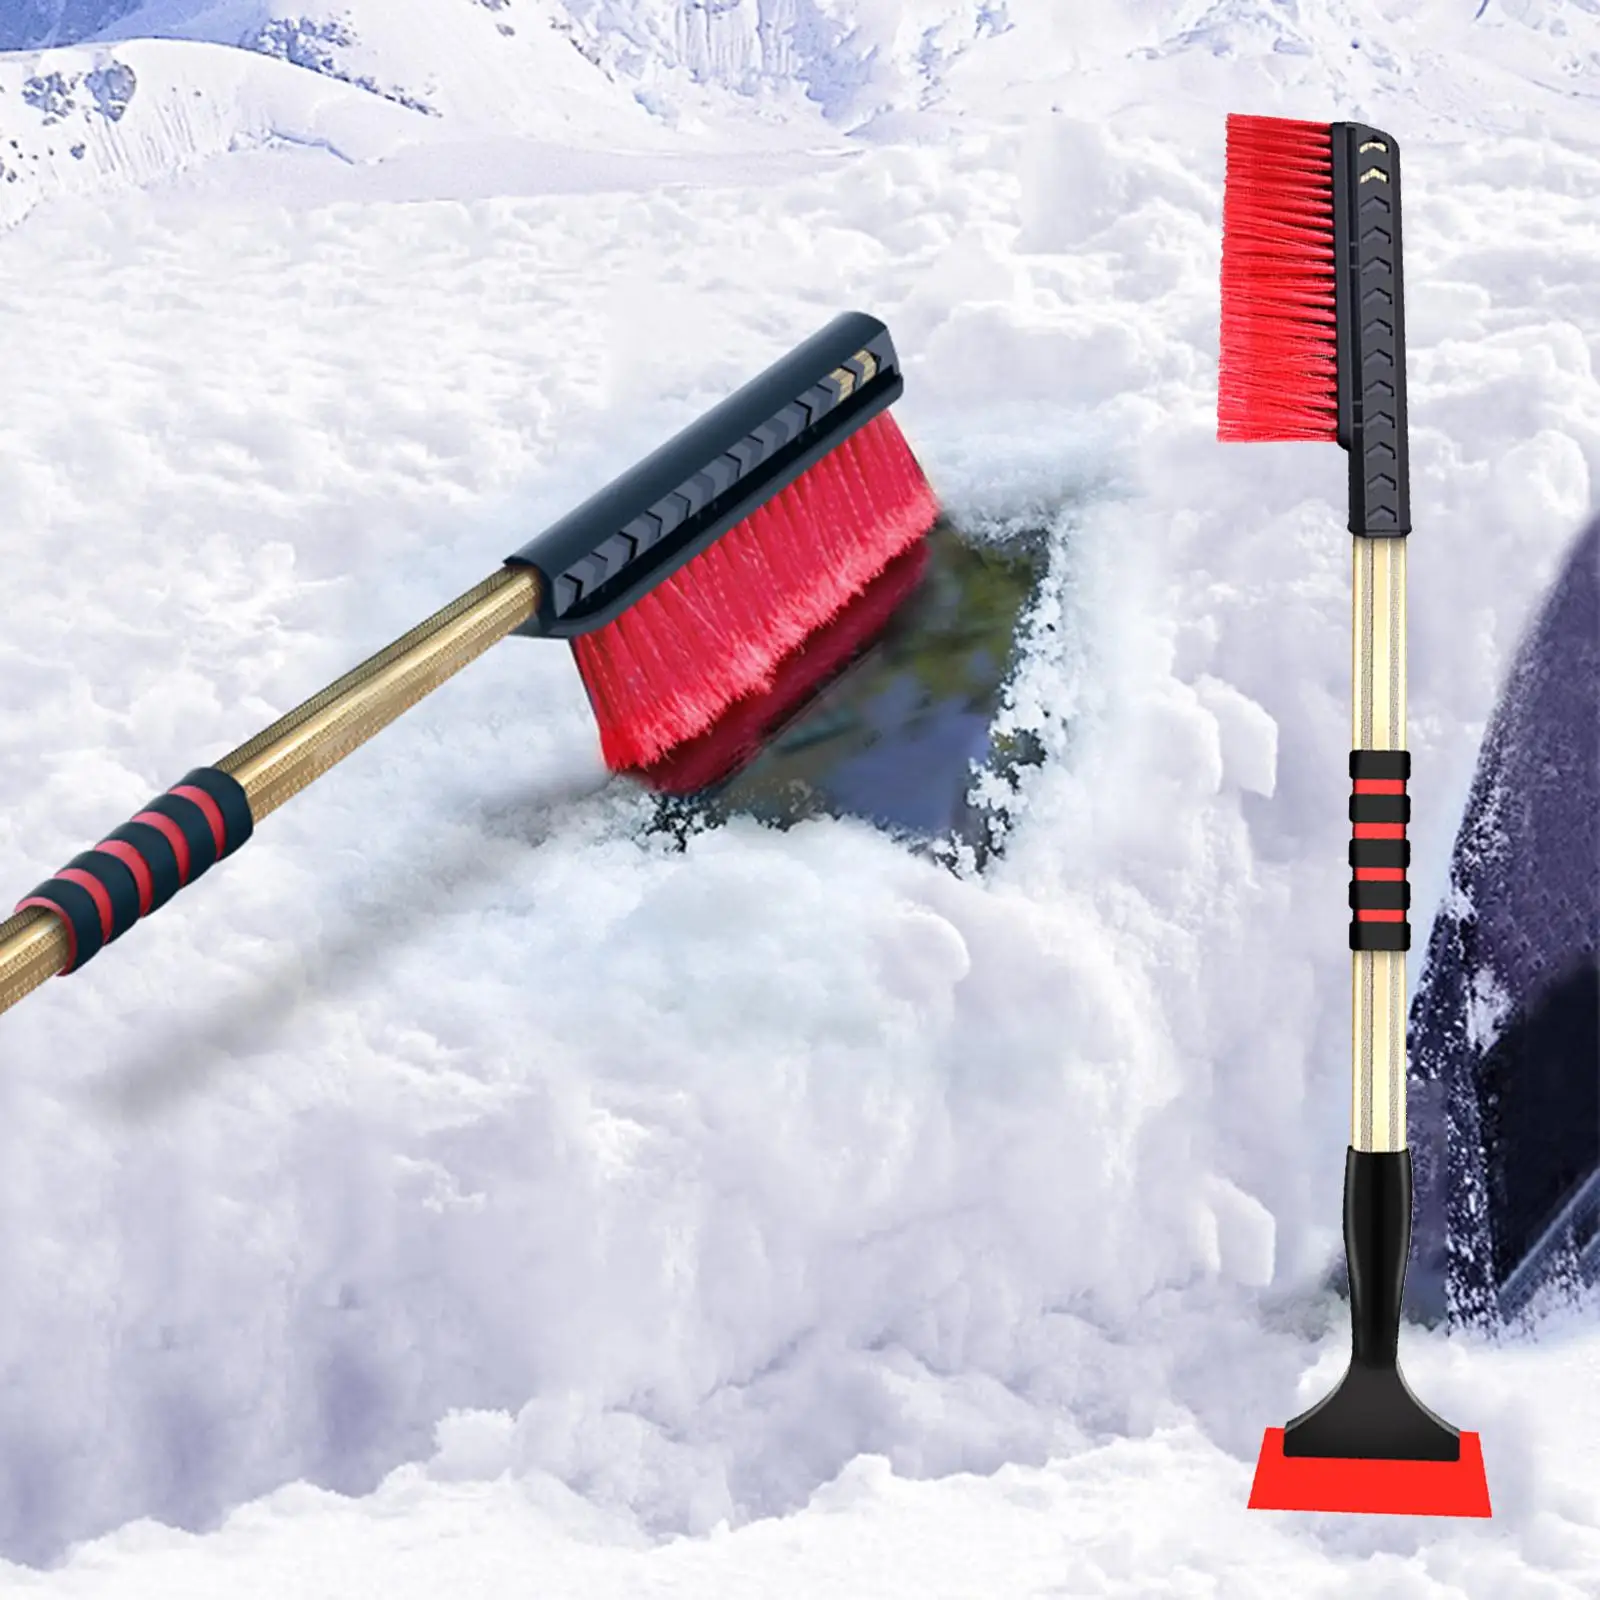 Portable Winter Snow Removal Brush Tool Telescopic Handle Car Window Snow Cleaner Ice Snow Scraper for Truck Vehicle SUV